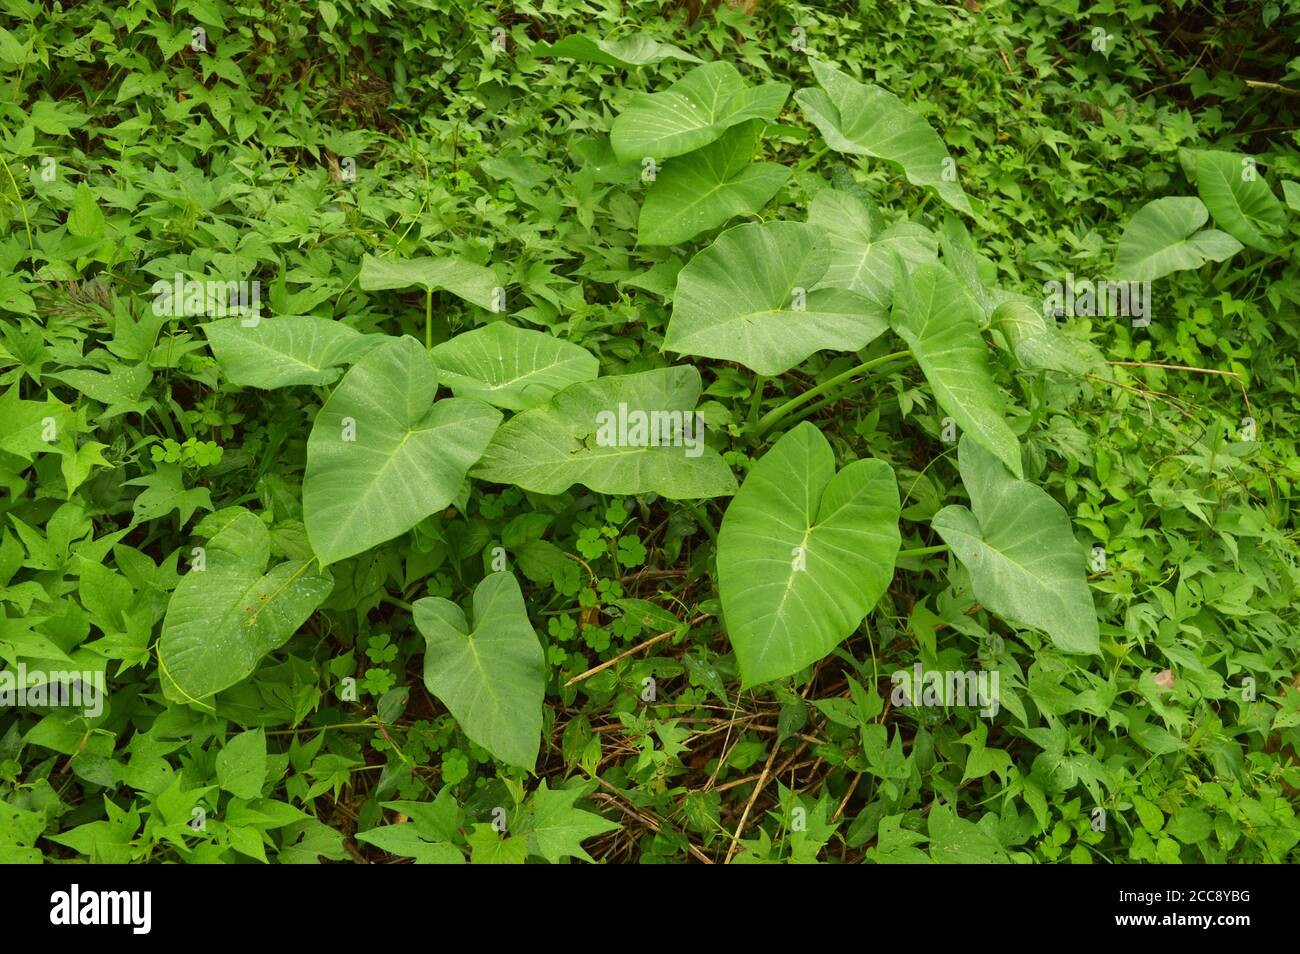 colocasia leaves growing in the wild. Colocasia is a genus of flowering plants in the family Araceae, native to southeastern Asia. Stock Photo